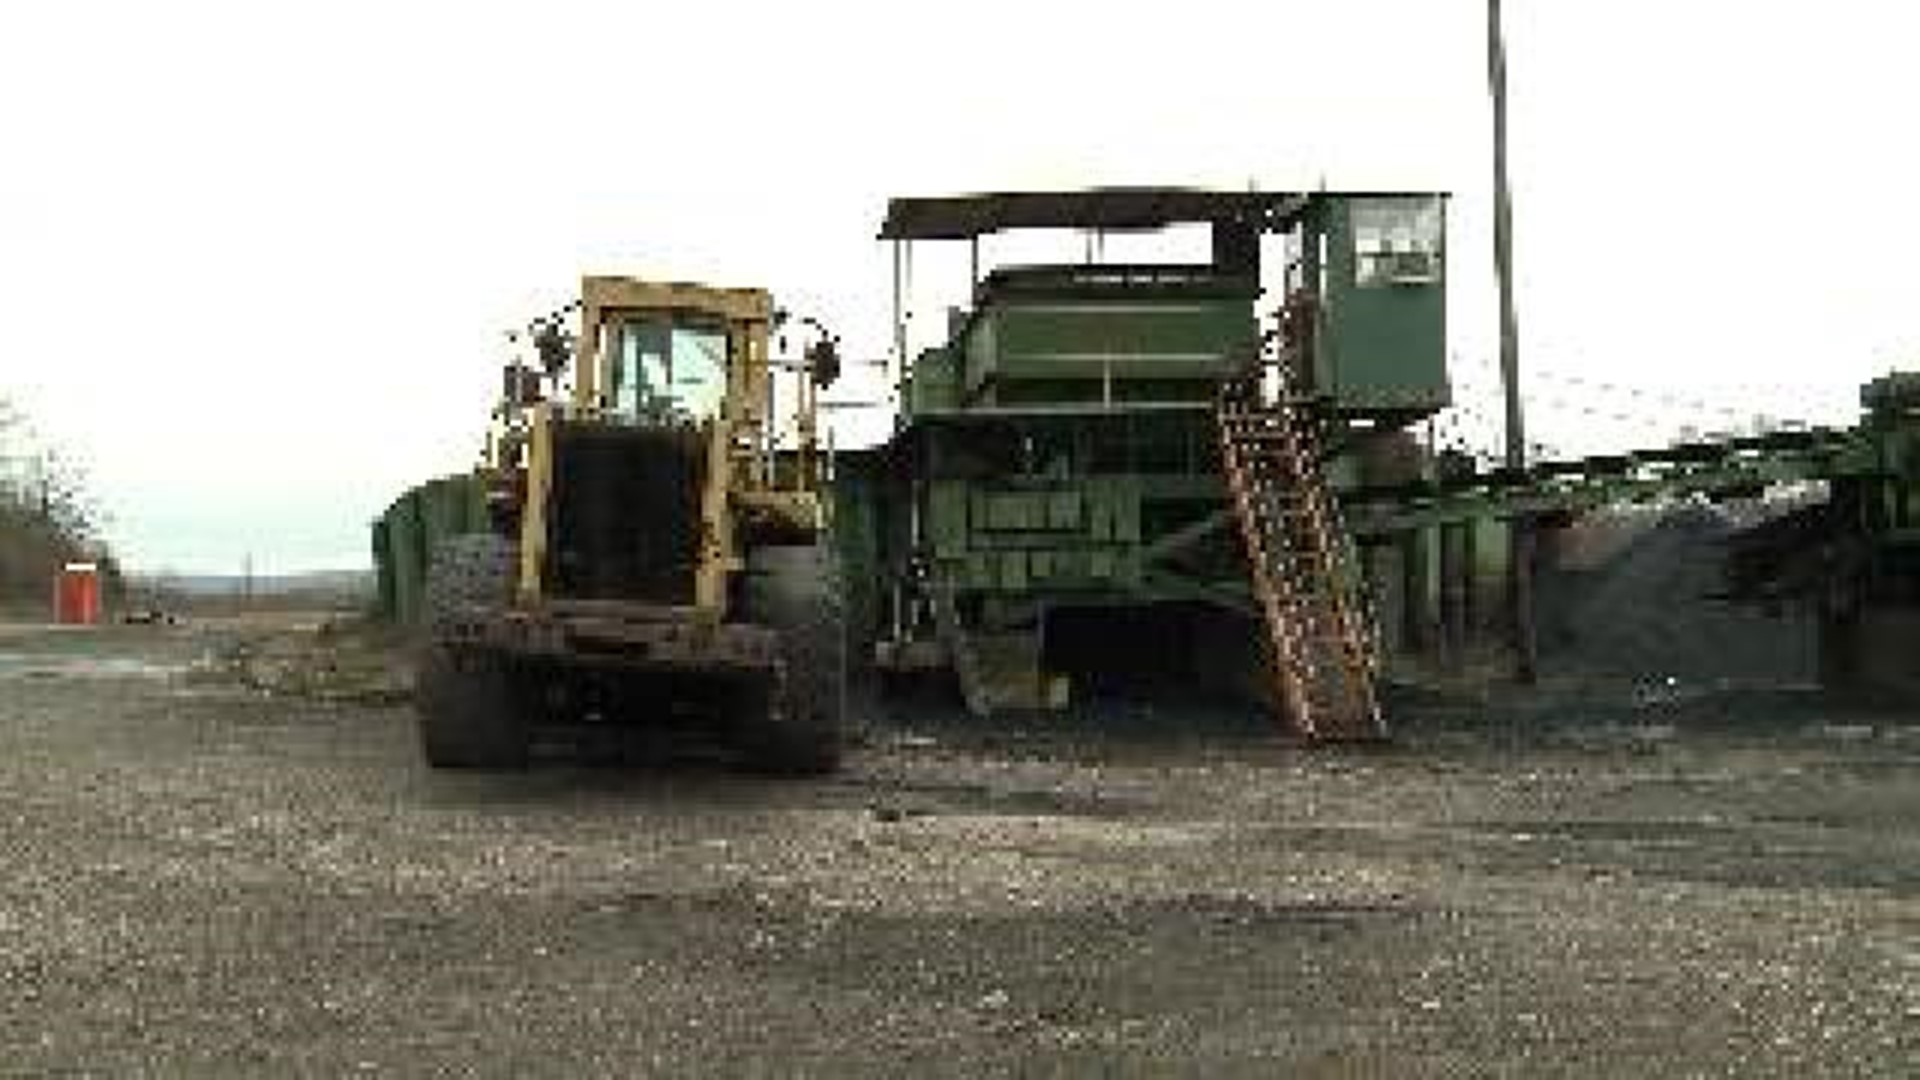 Coal Could Spur Job Growth in LeFlore County